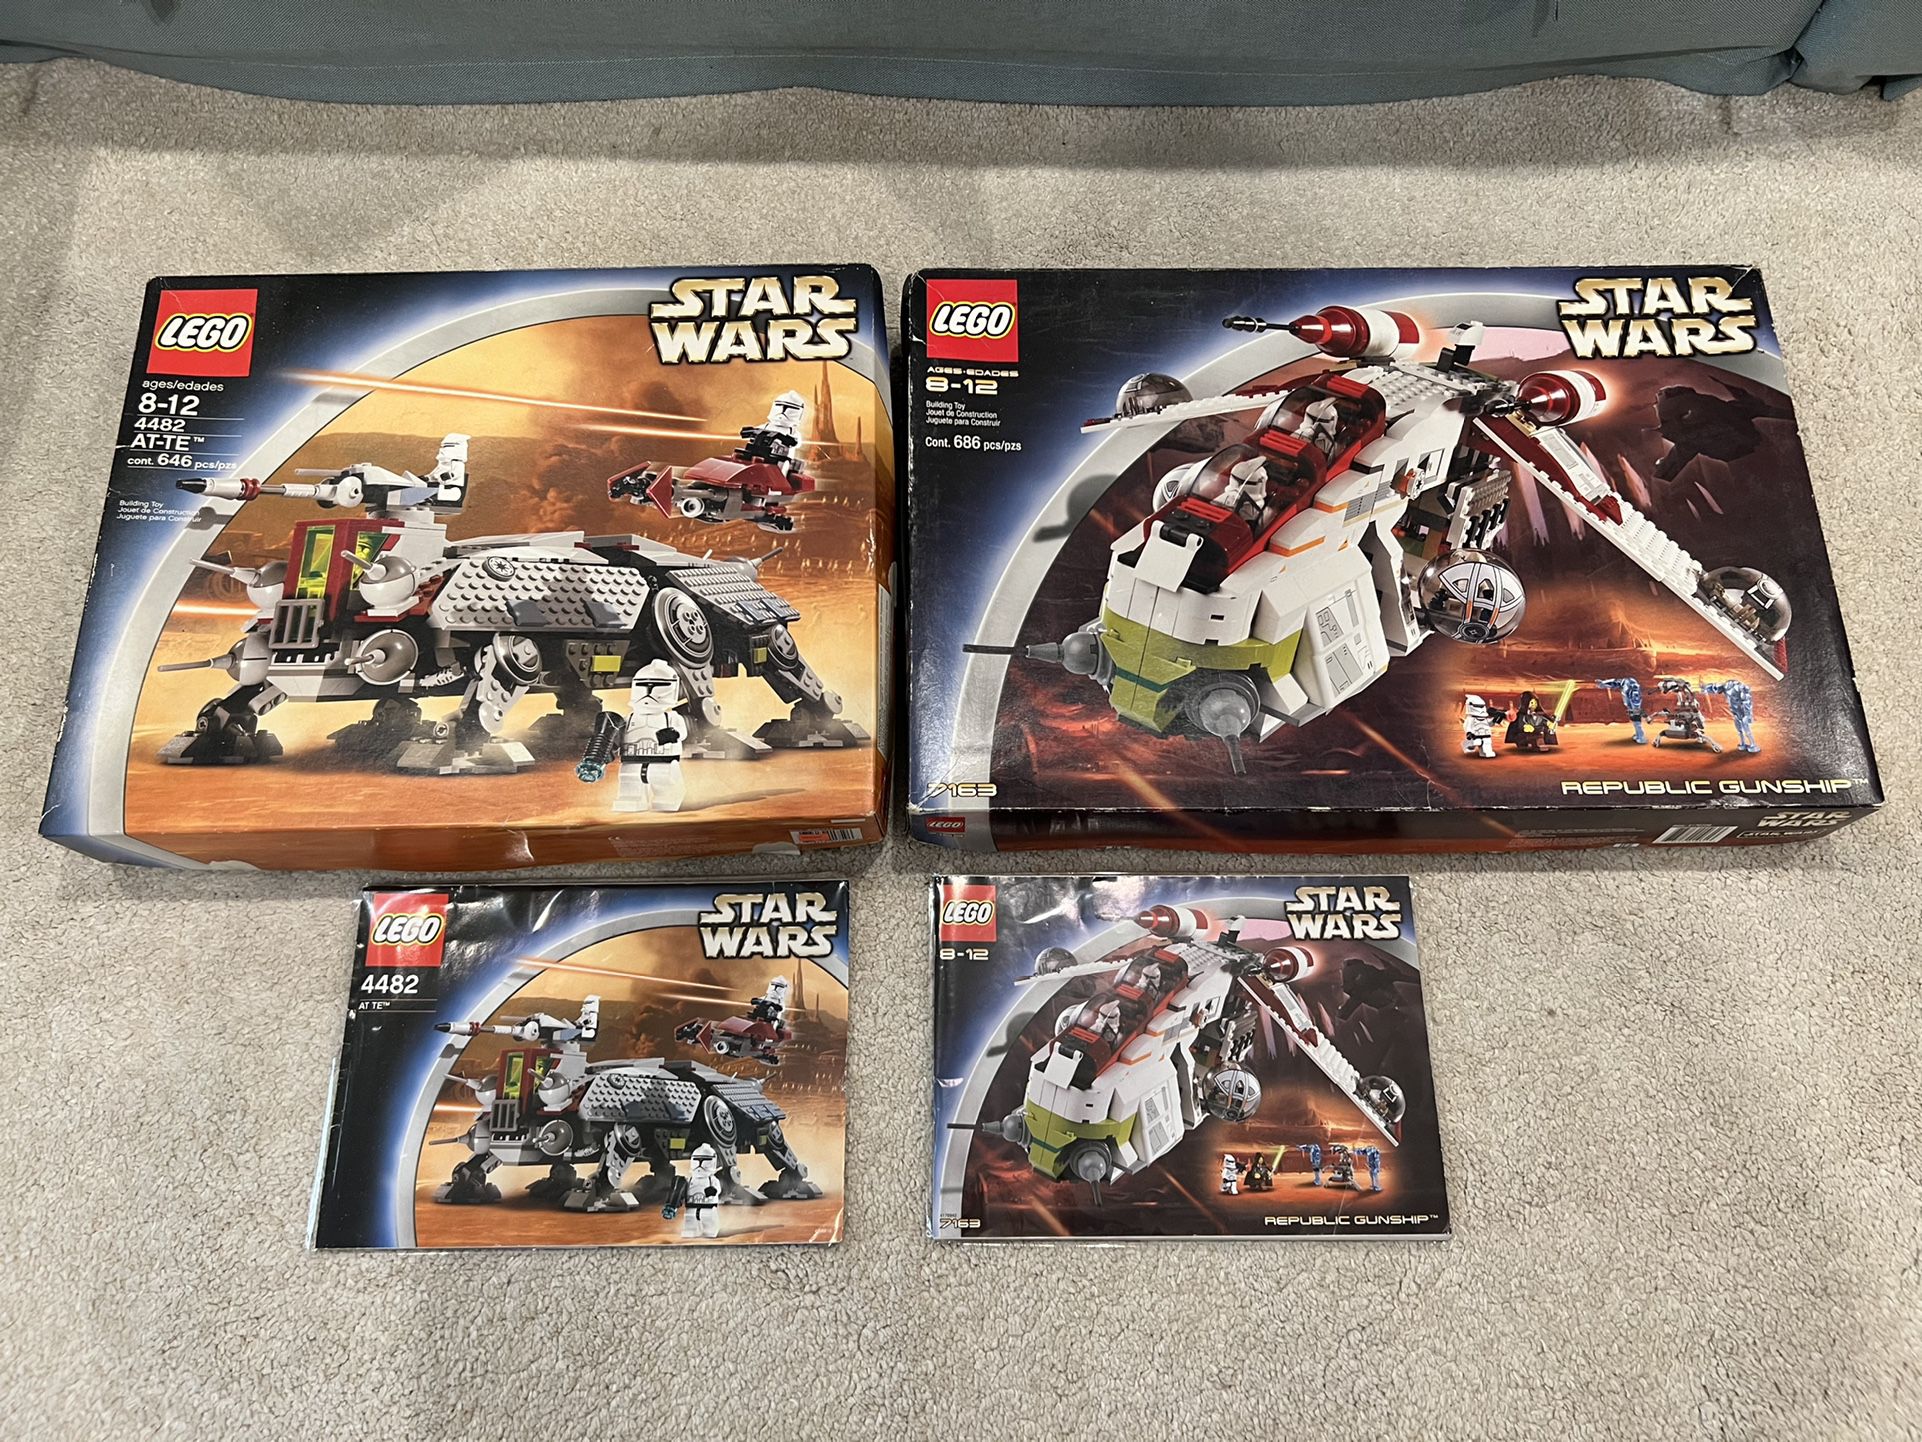 LEGO Star 7163 + 4482 Sale in West Hollywood, CA - OfferUp